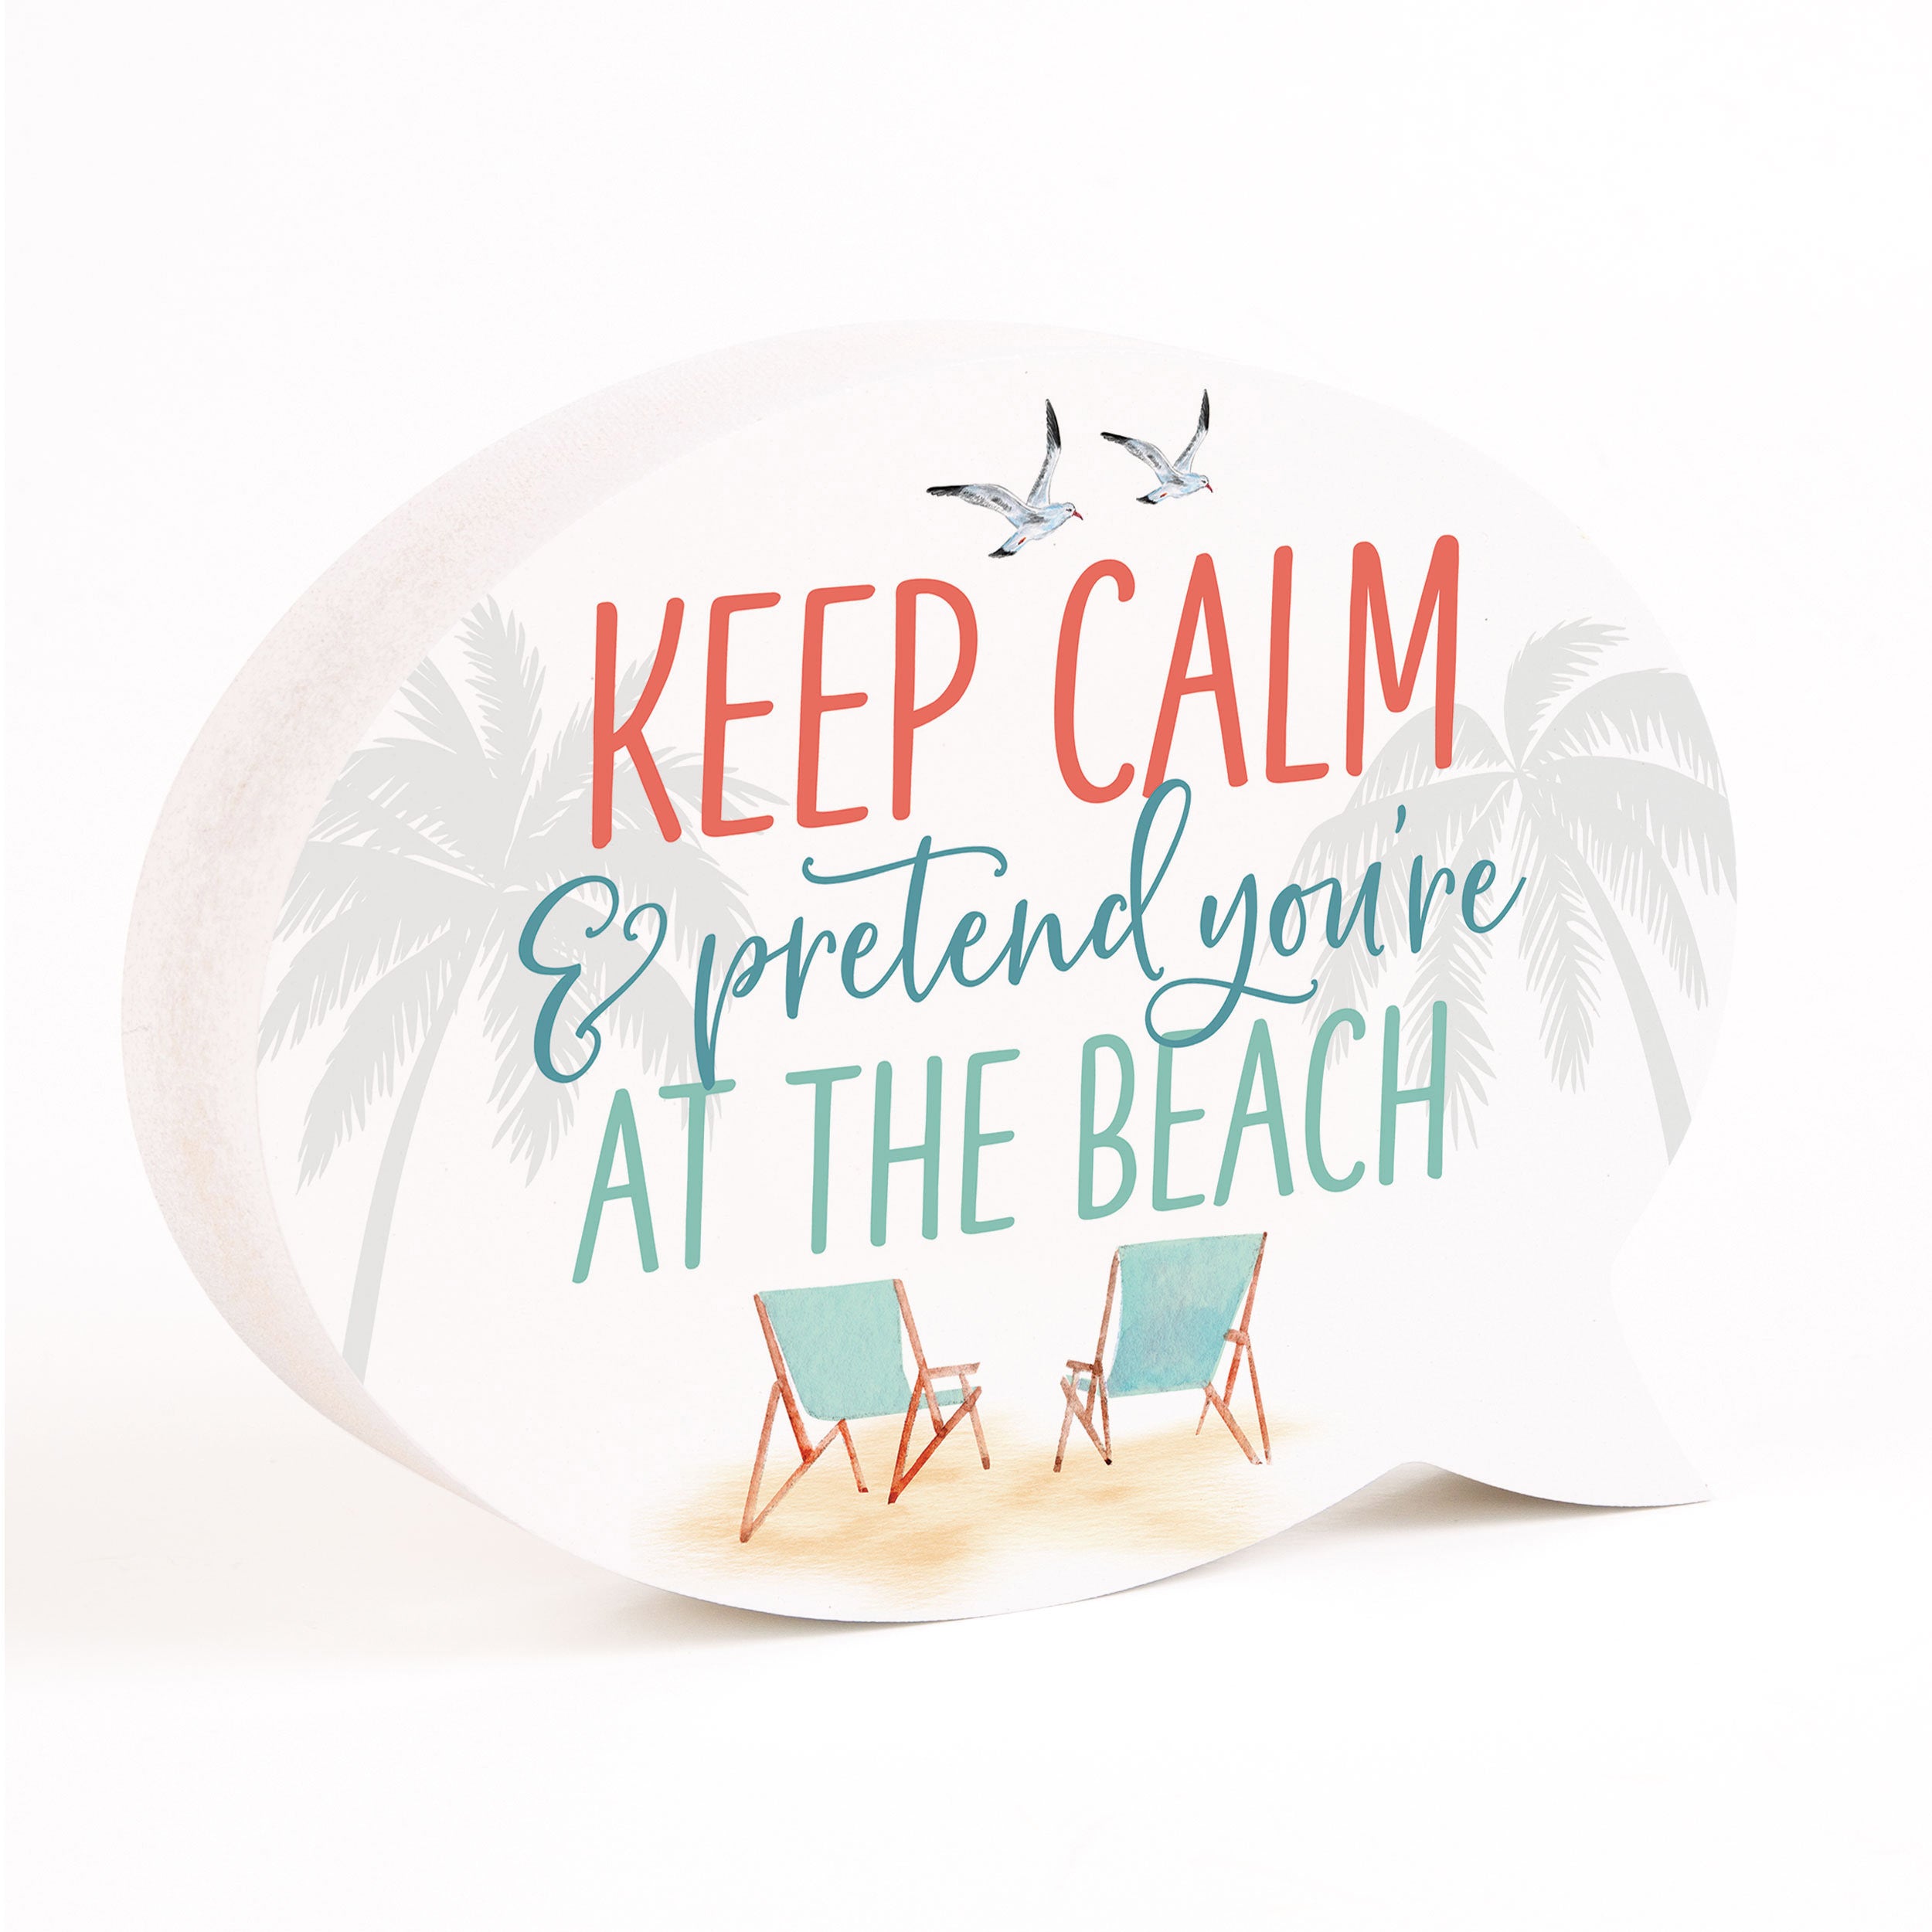 Keep Calm And Pretend You're At The Beach Word Bubble